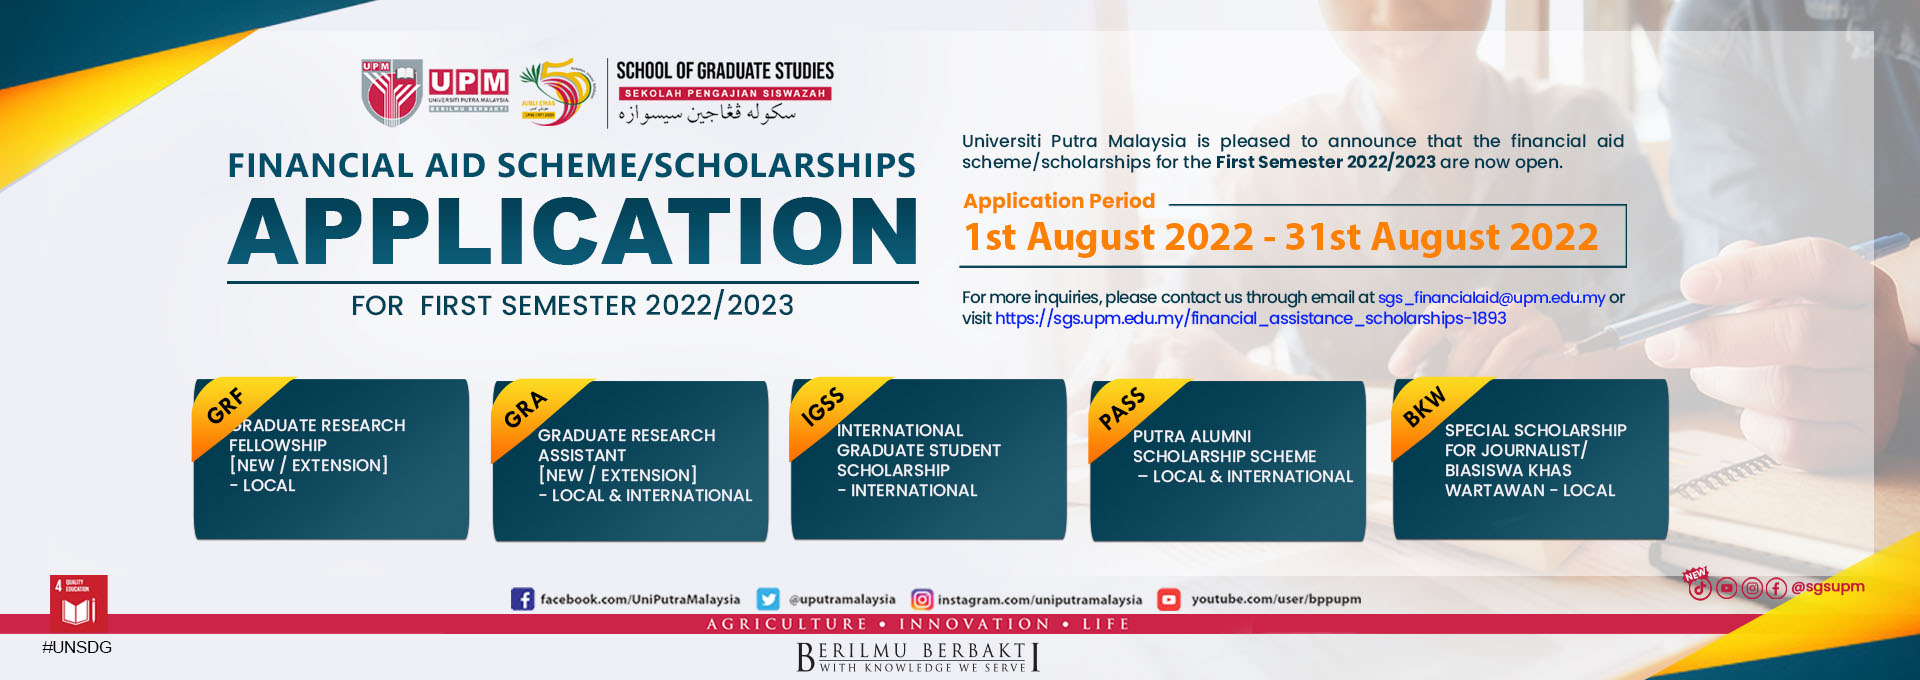 2022 Financial Assistance and Scholarships